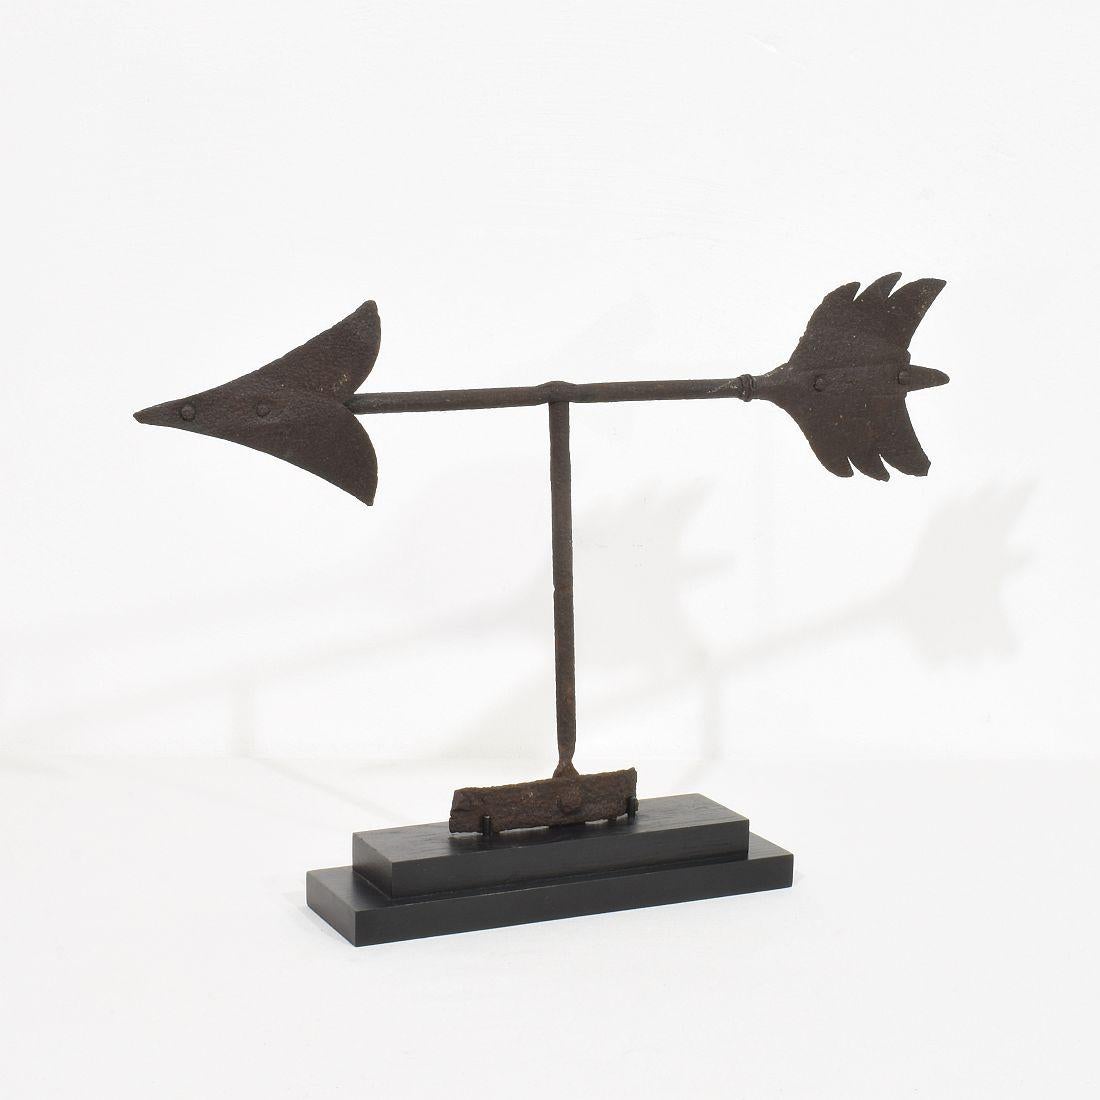 French Provincial 19th Century French Iron Weathervane Roof Finial For Sale